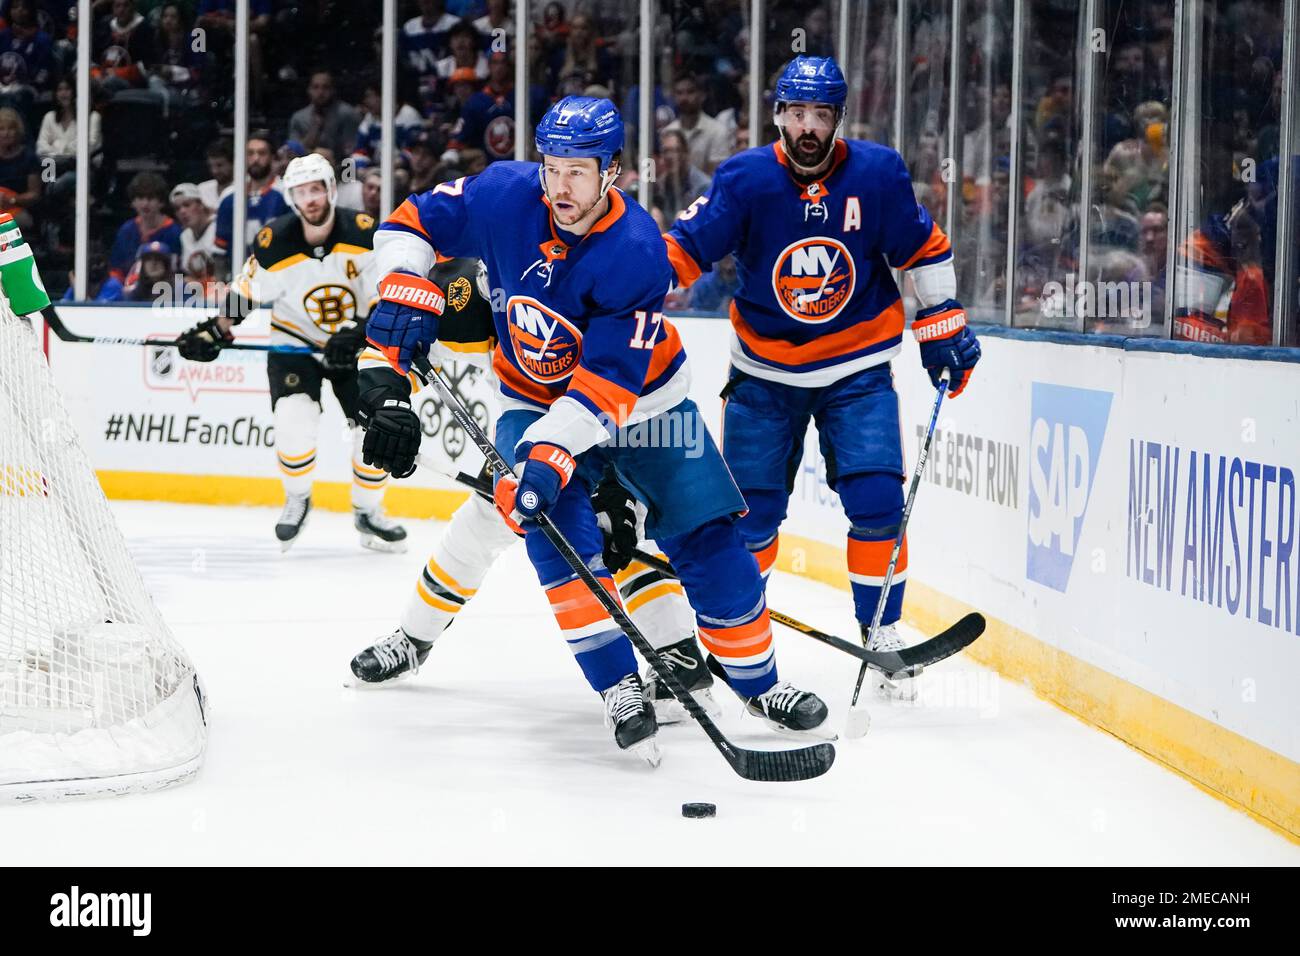 Boston Bruins acquire defenceman Mike Reilly; New York Islanders